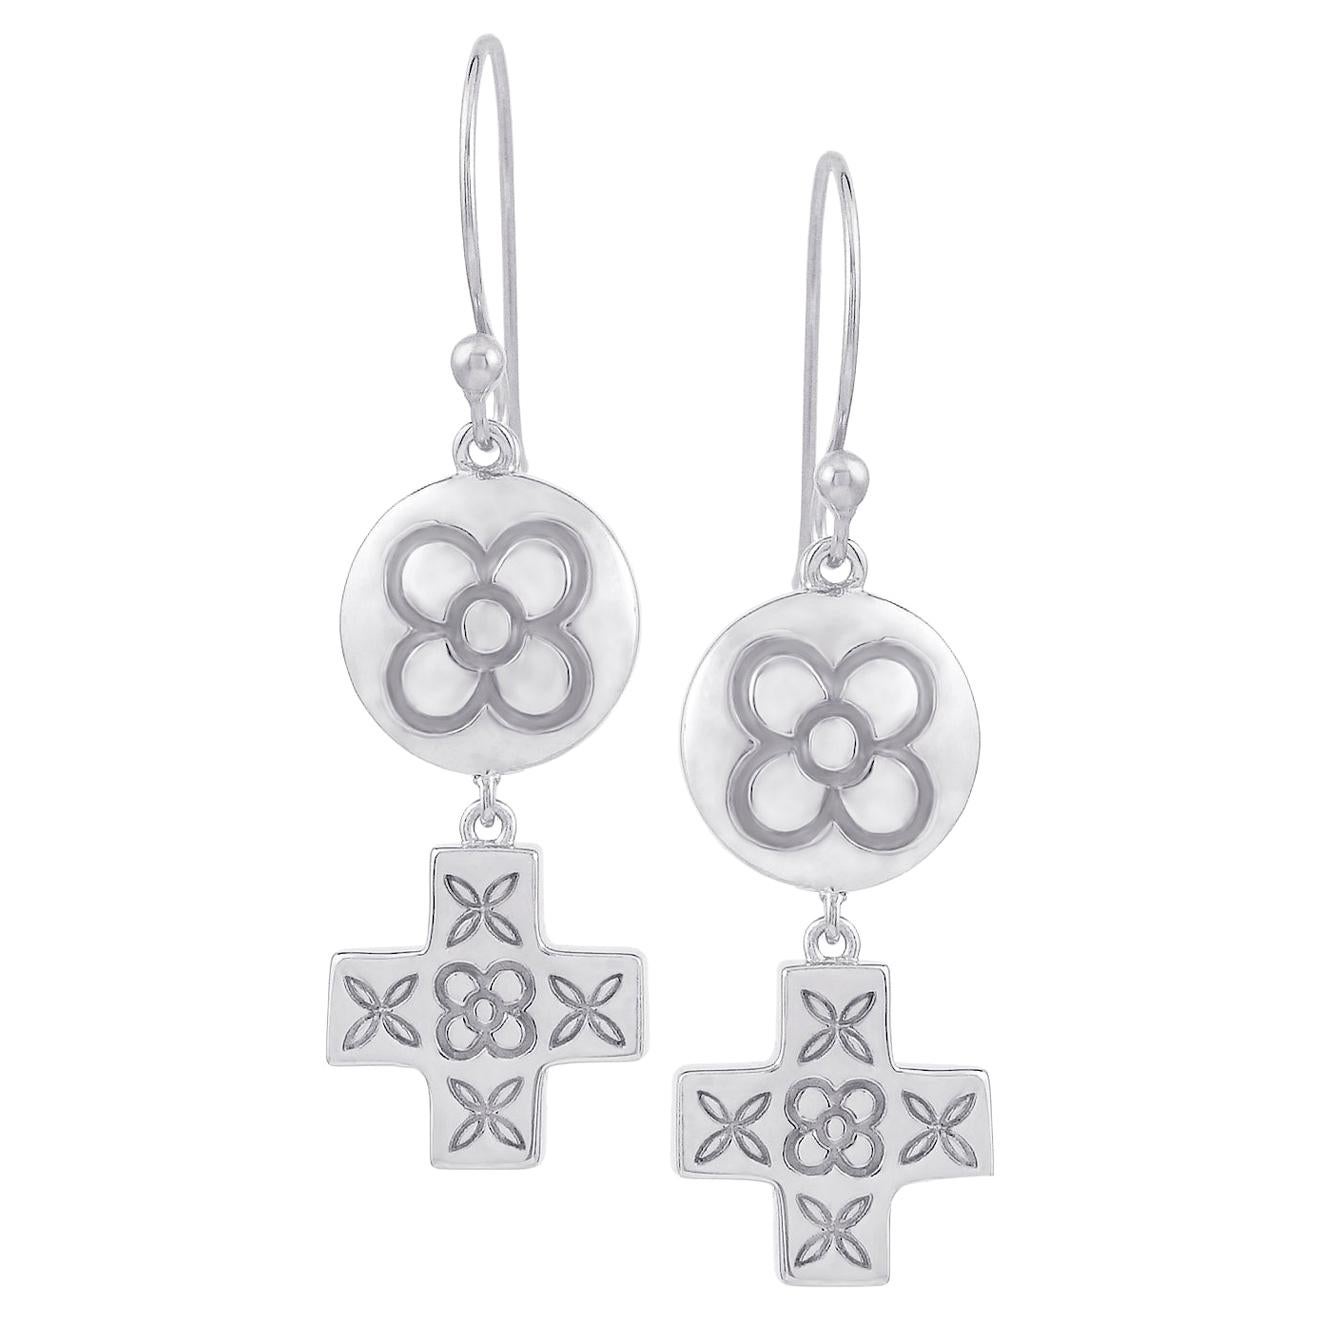 White Gold Plated Sterling Silver Flower Cross Drop Earrings DIAMONDS in the SKY For Sale